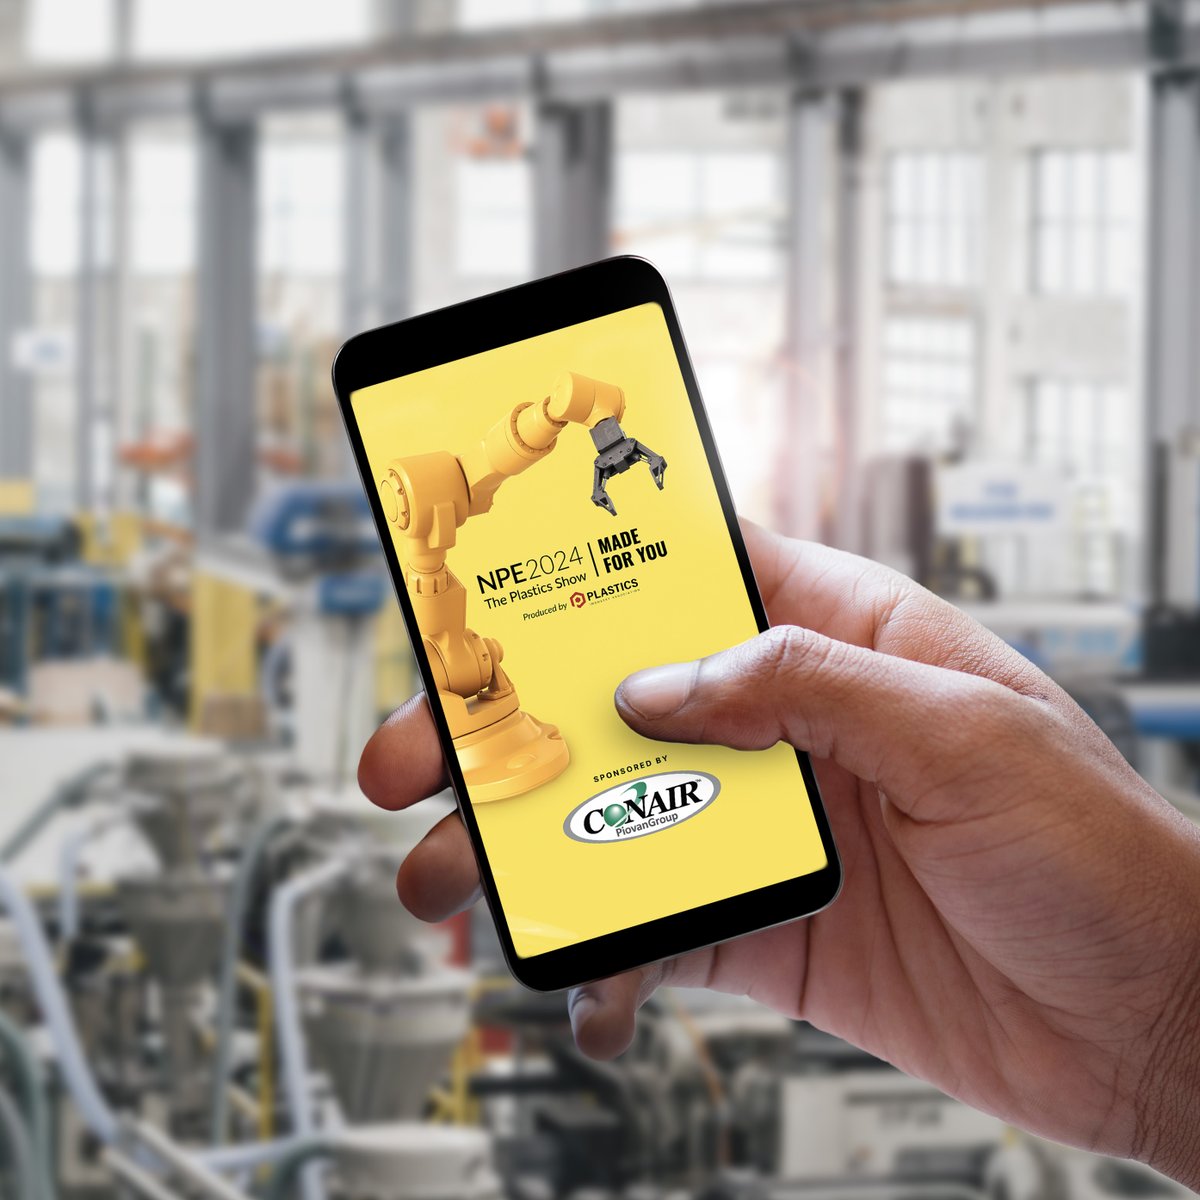 Get ready to revolutionize your NPE experience with the NPE2024 Mobile App – your ultimate guide to navigating the world's premier plastics trade show. Available on the App Store and Google Play. Download now by searching 'NPE2024'. #NPE2024 #Conair #PlasticsInnovation